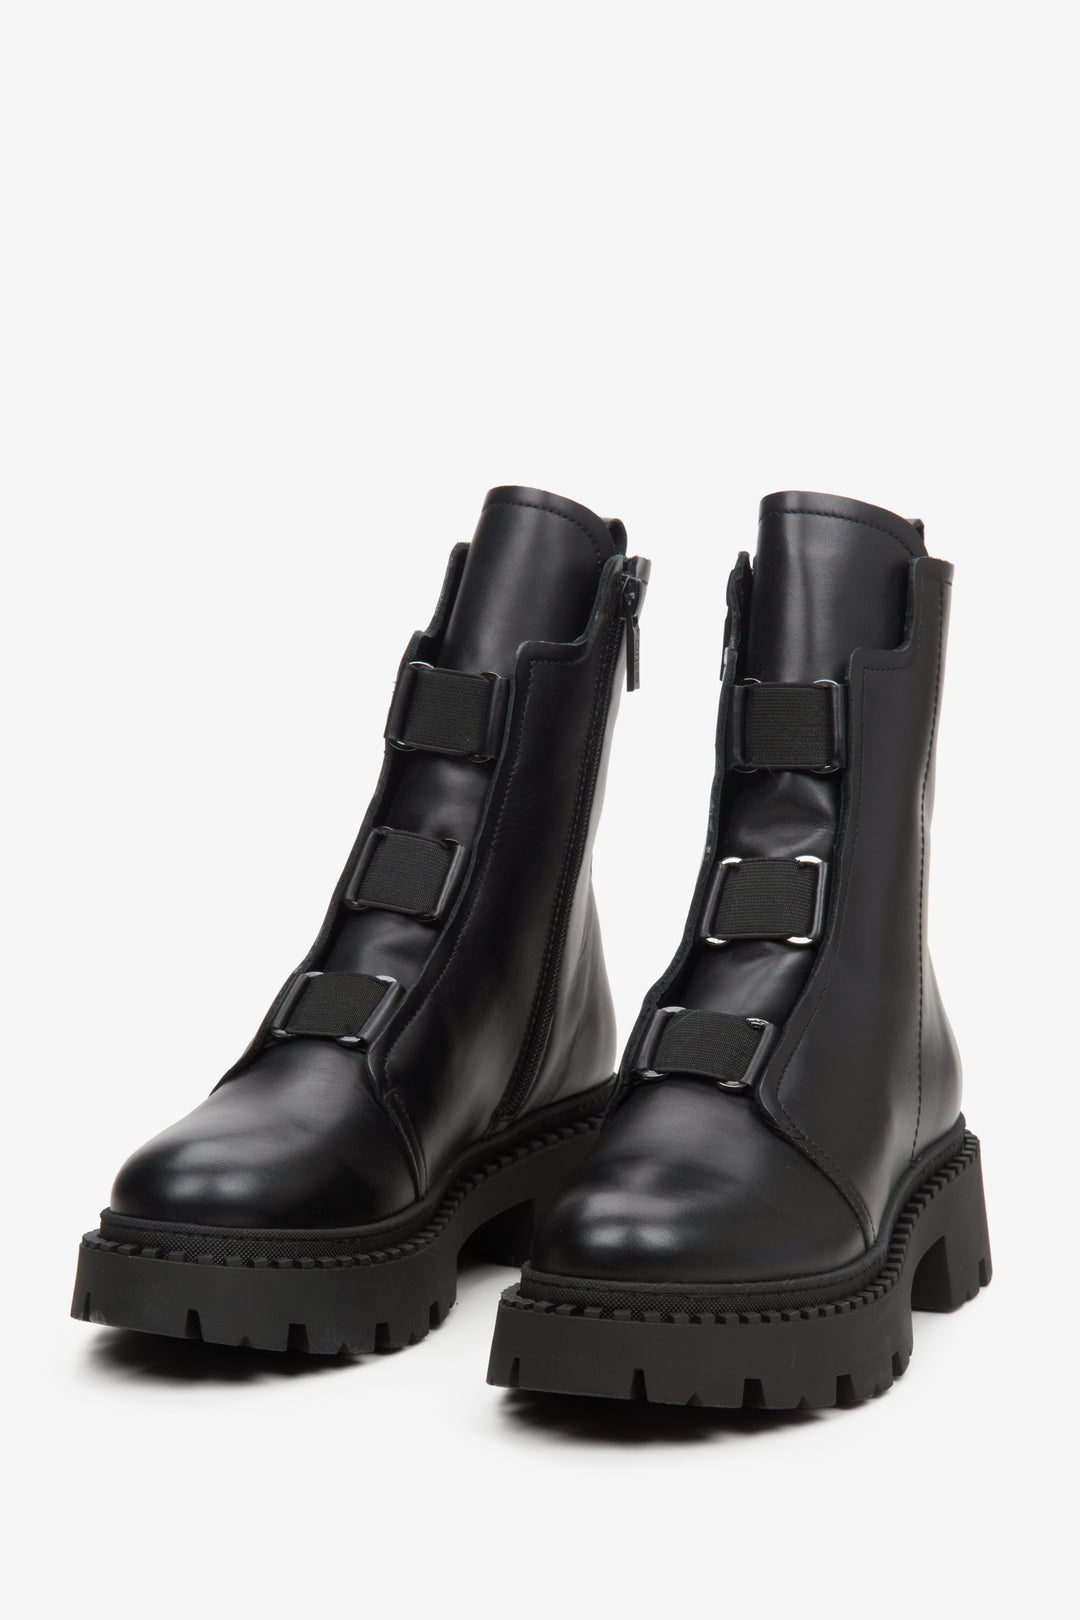 Estro women's black ankle boots with soft uppers - close-up on the front of the boots.